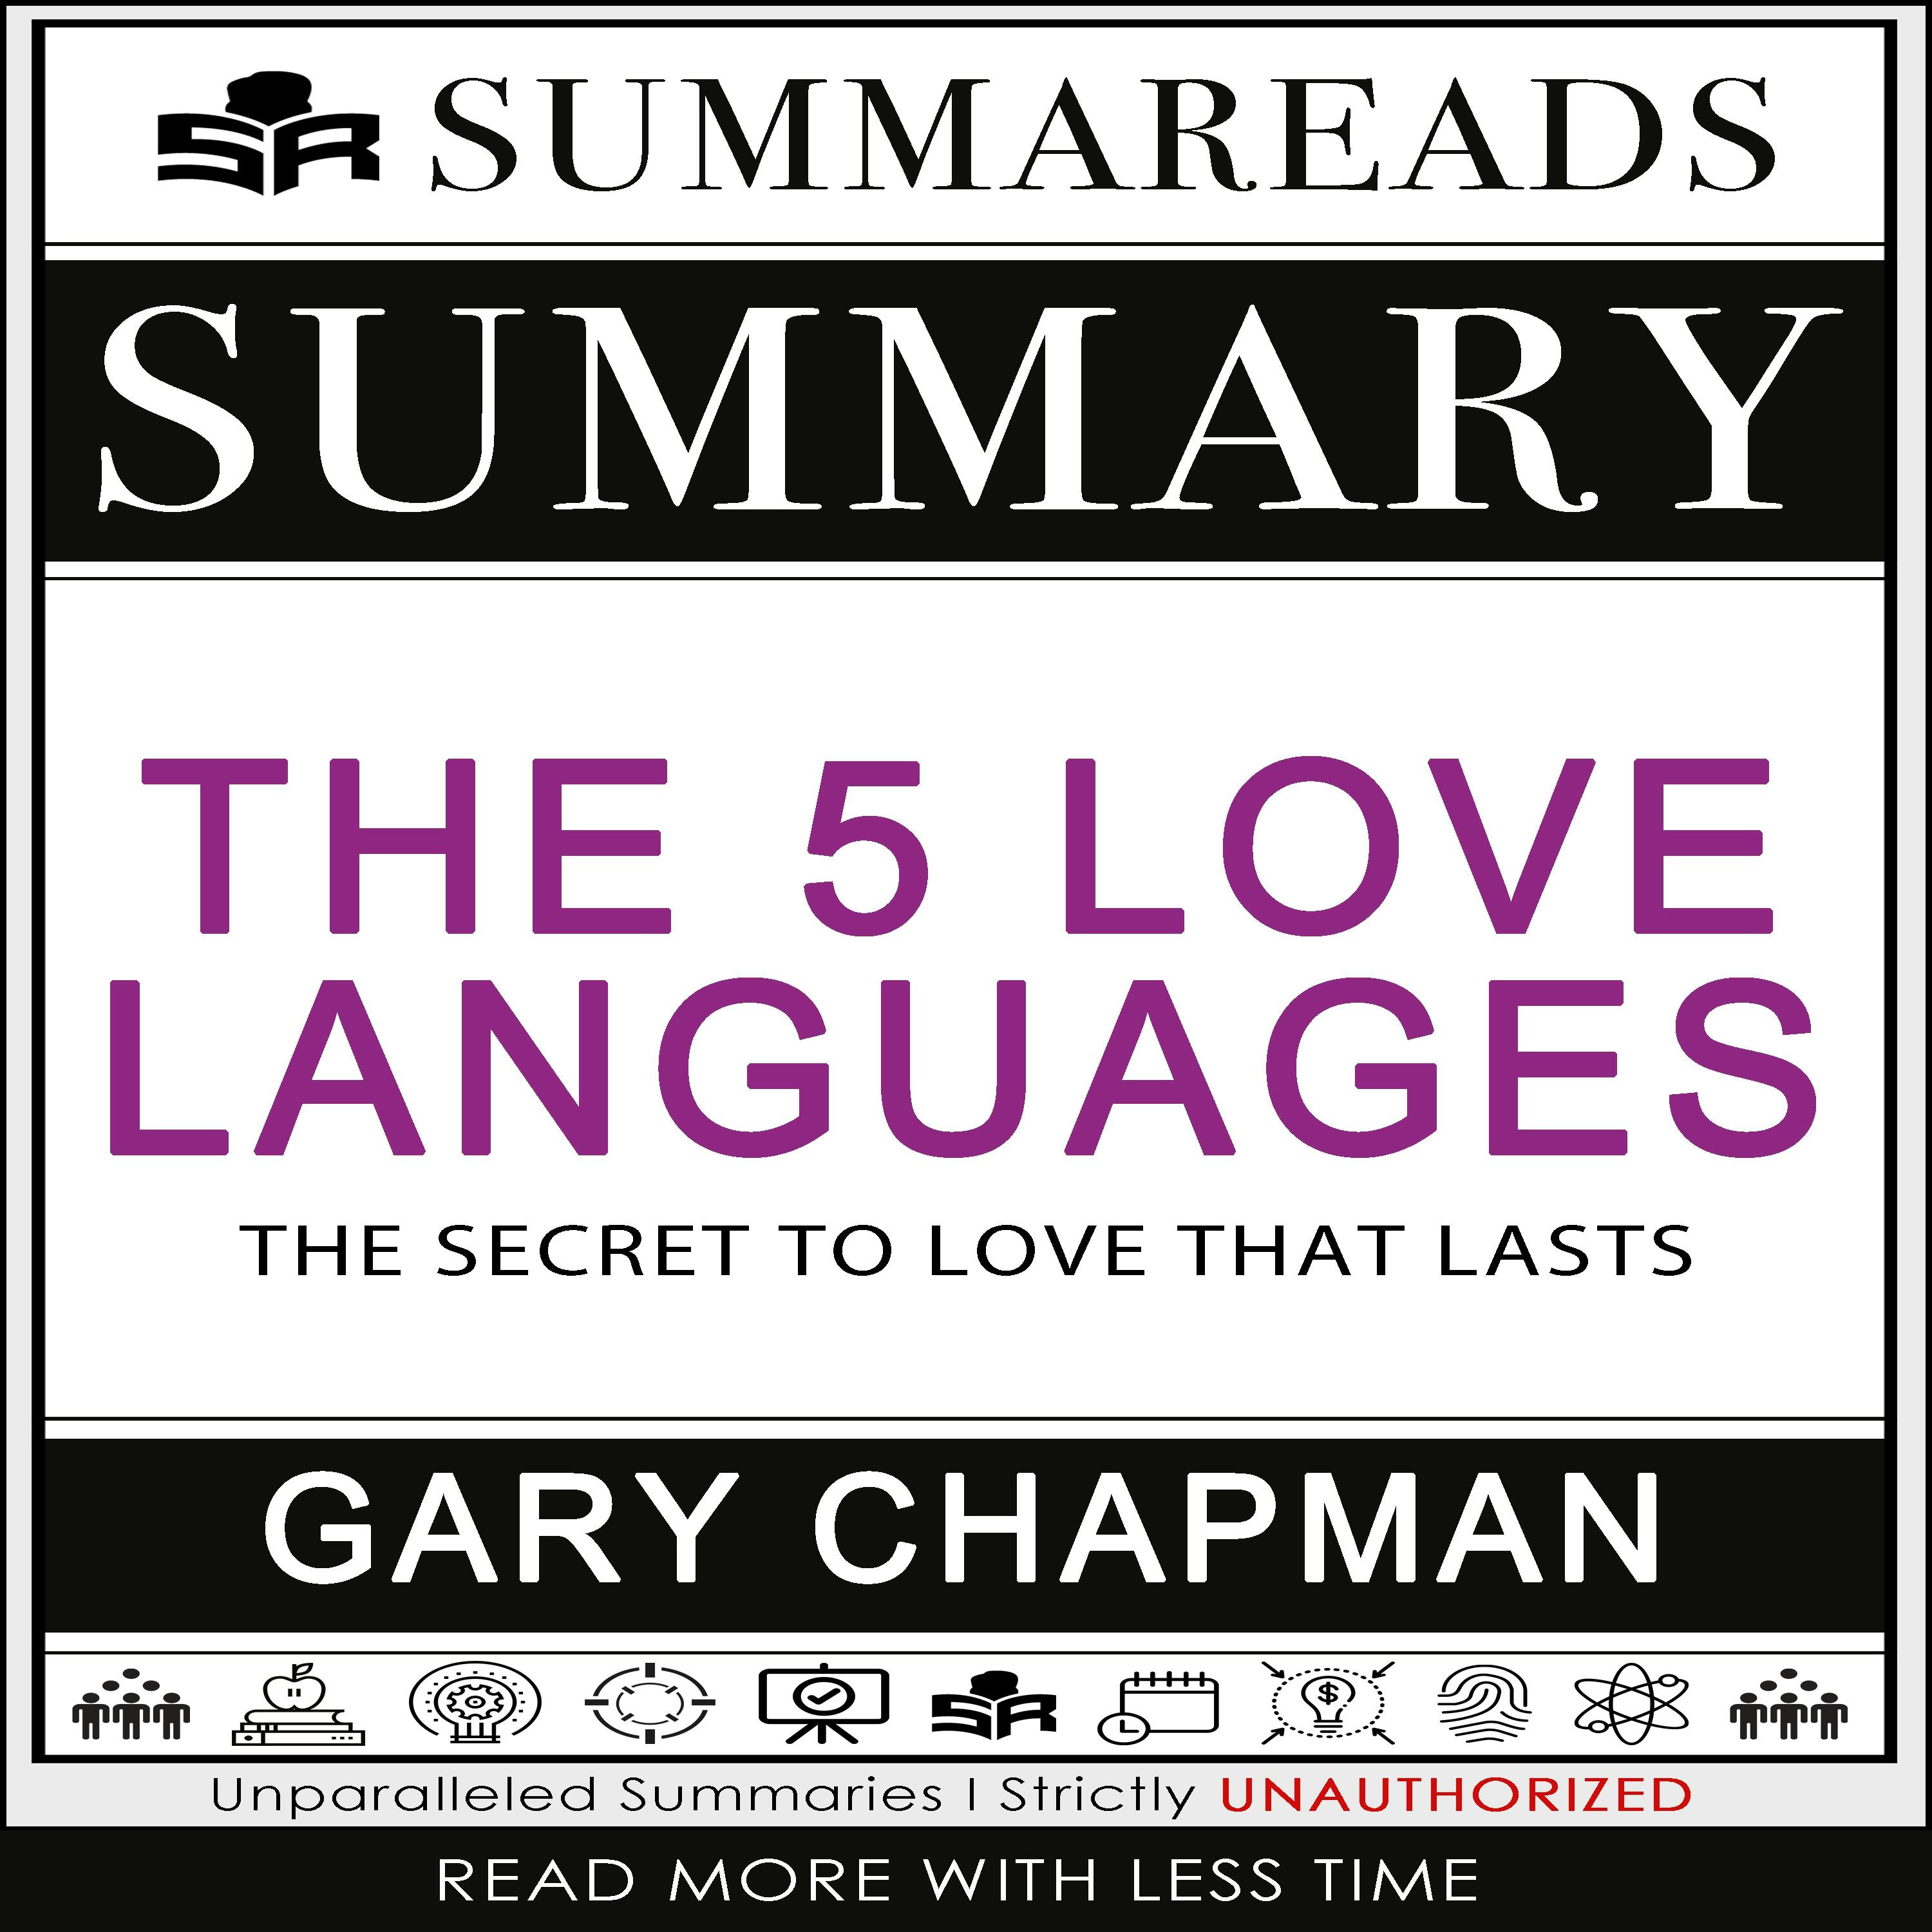 Summary of The 5 Love Languages: The Secret to Love that Lasts by Gary Chapman - Summareads Media